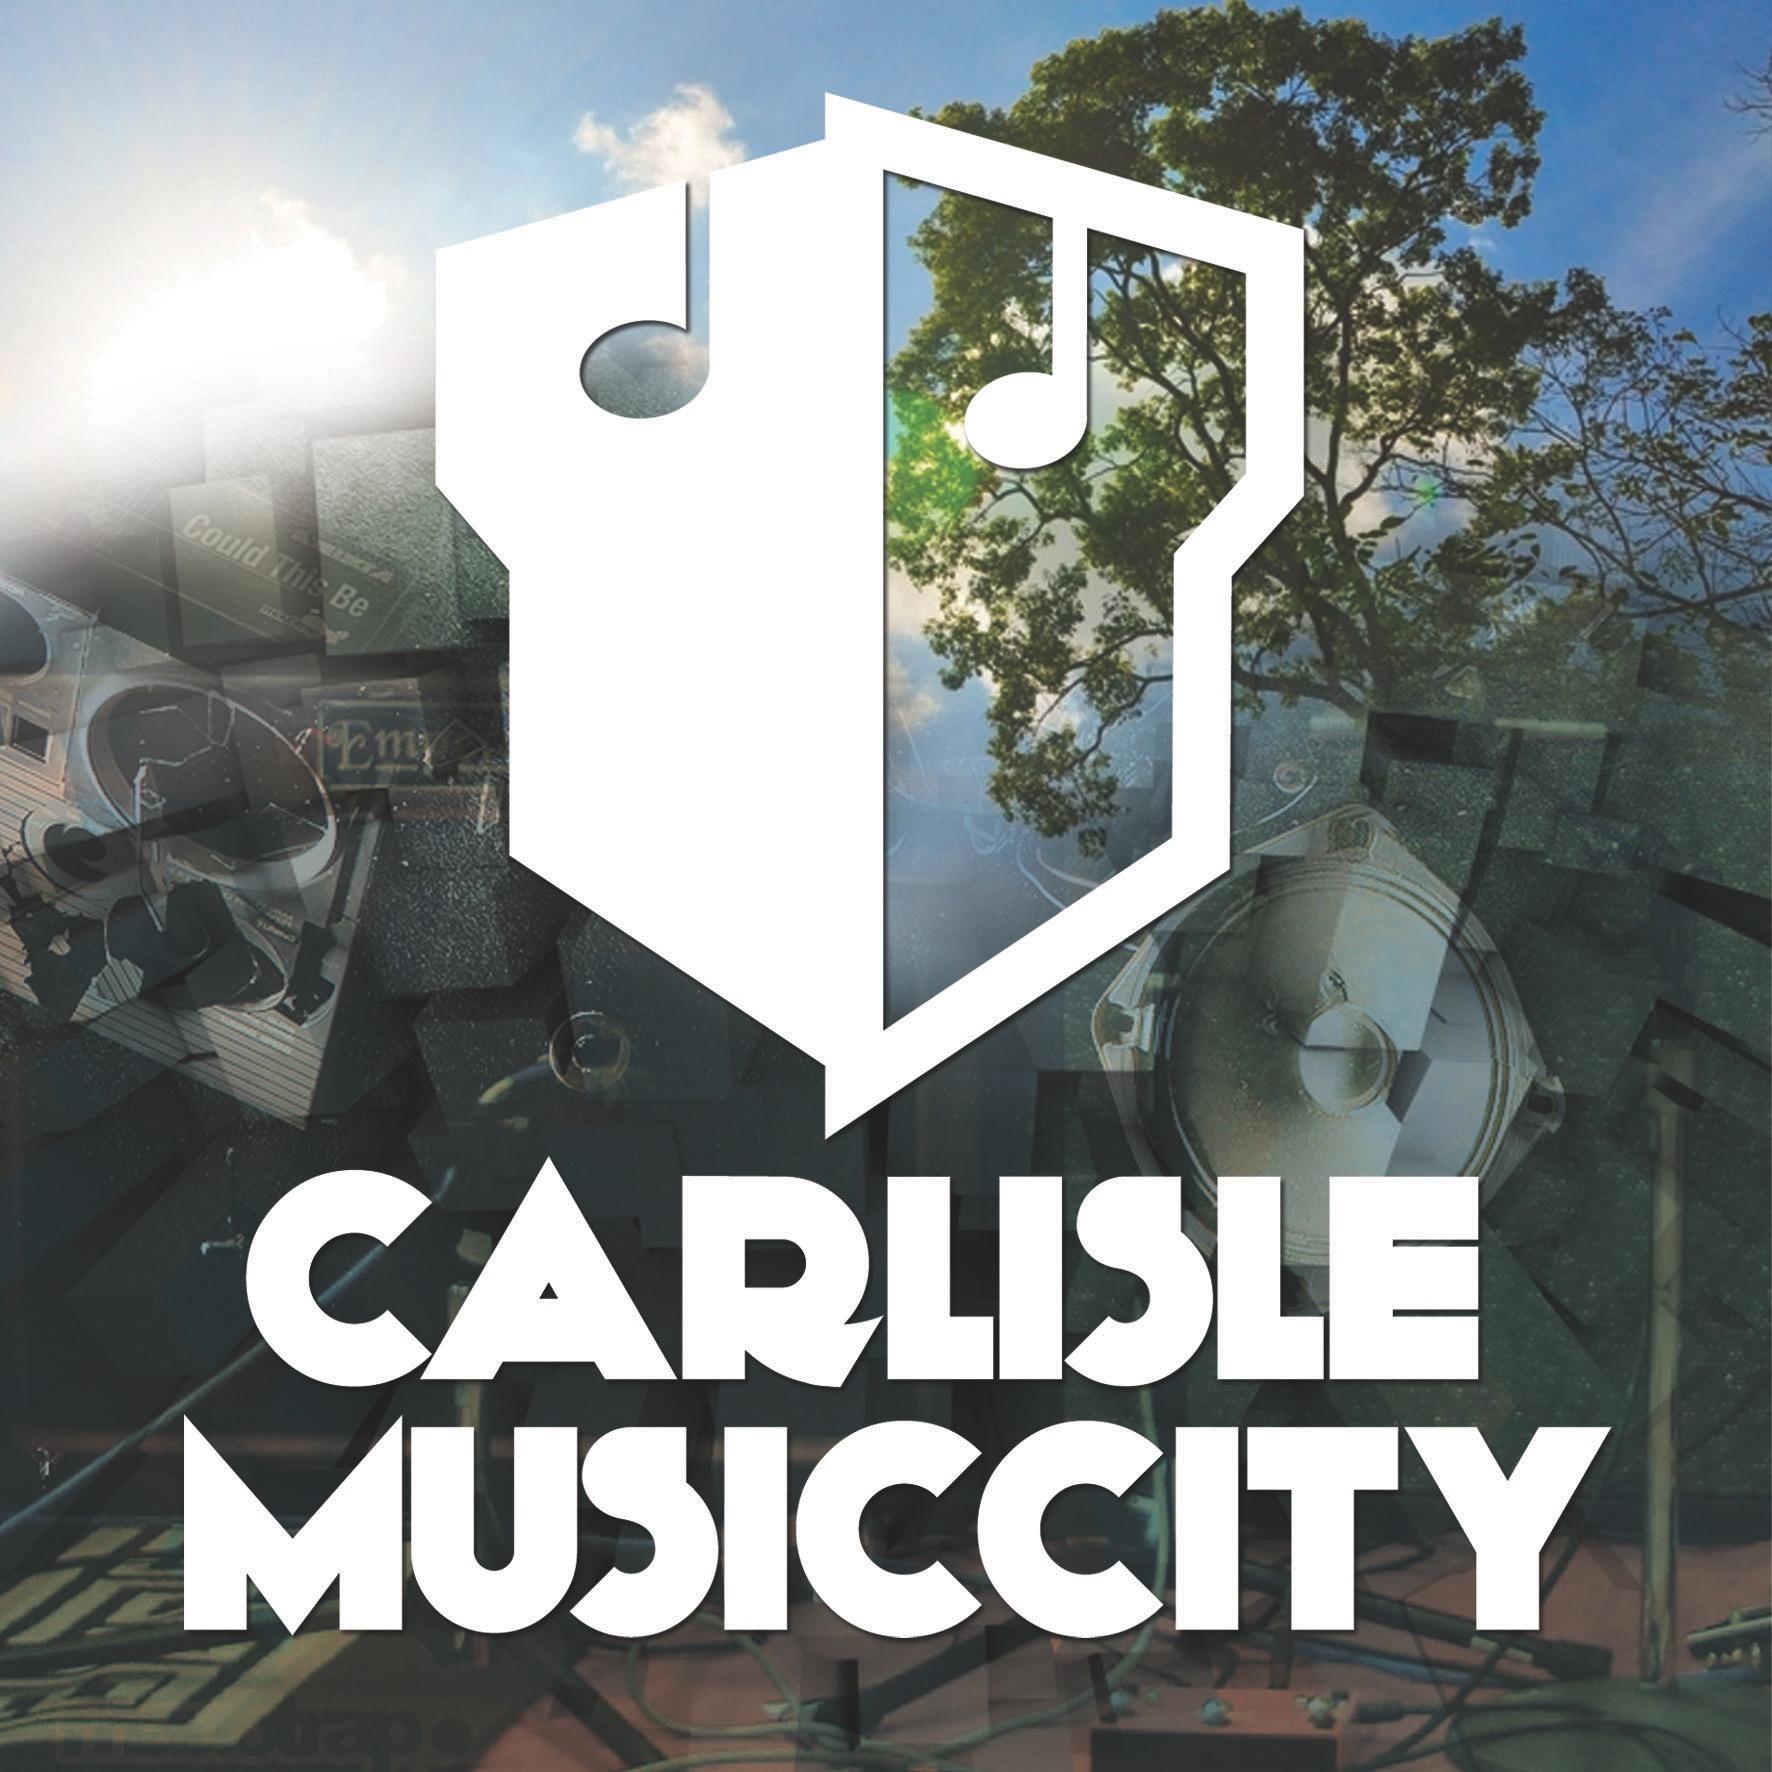 Carlisle Music City: Promoting and supporting the local music industry